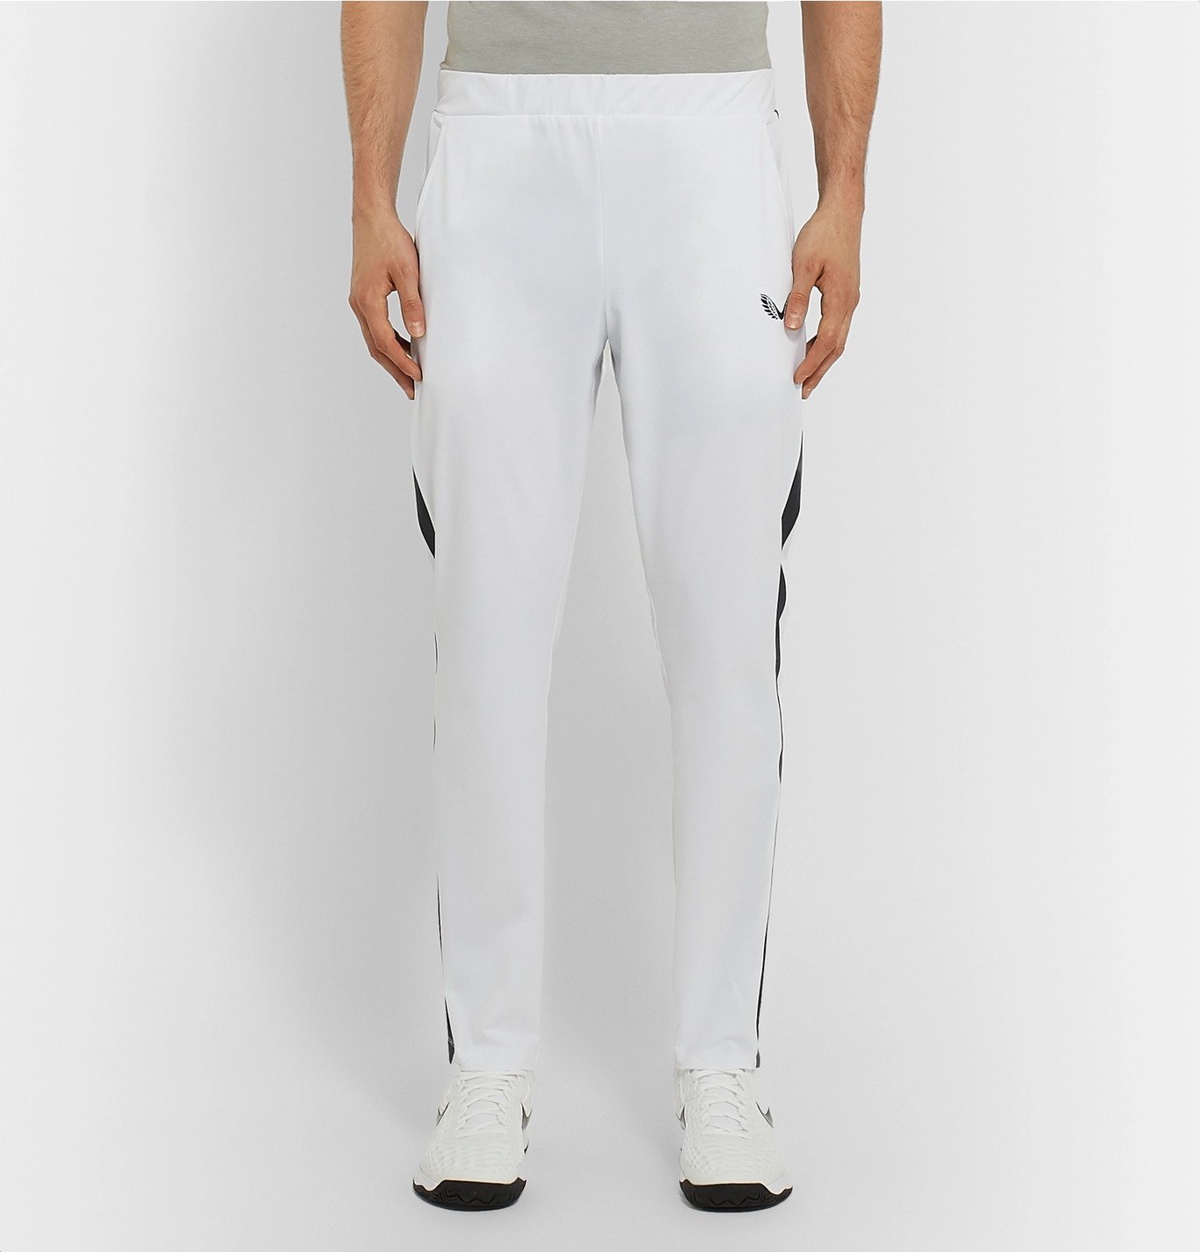 adidas Tennis trousers in white